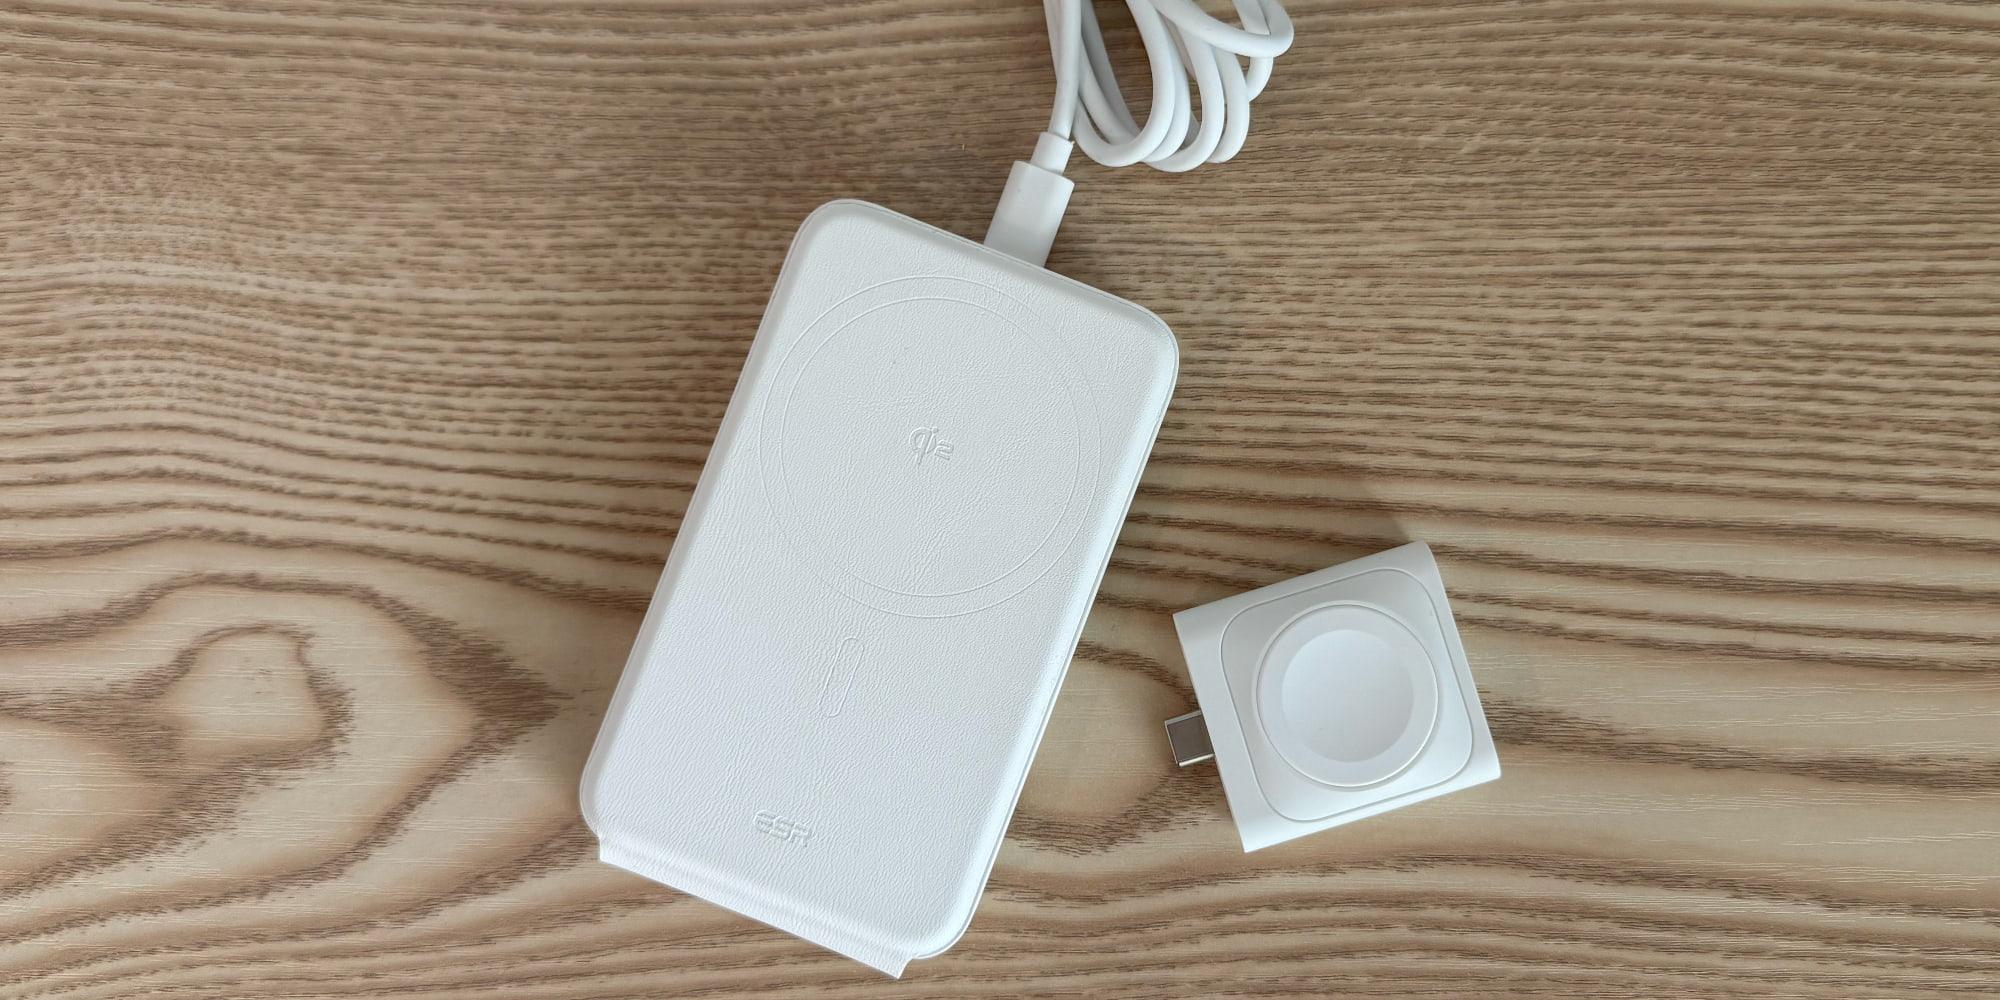 ESR 3-in-1 Qi2 iPhone Charger folded up